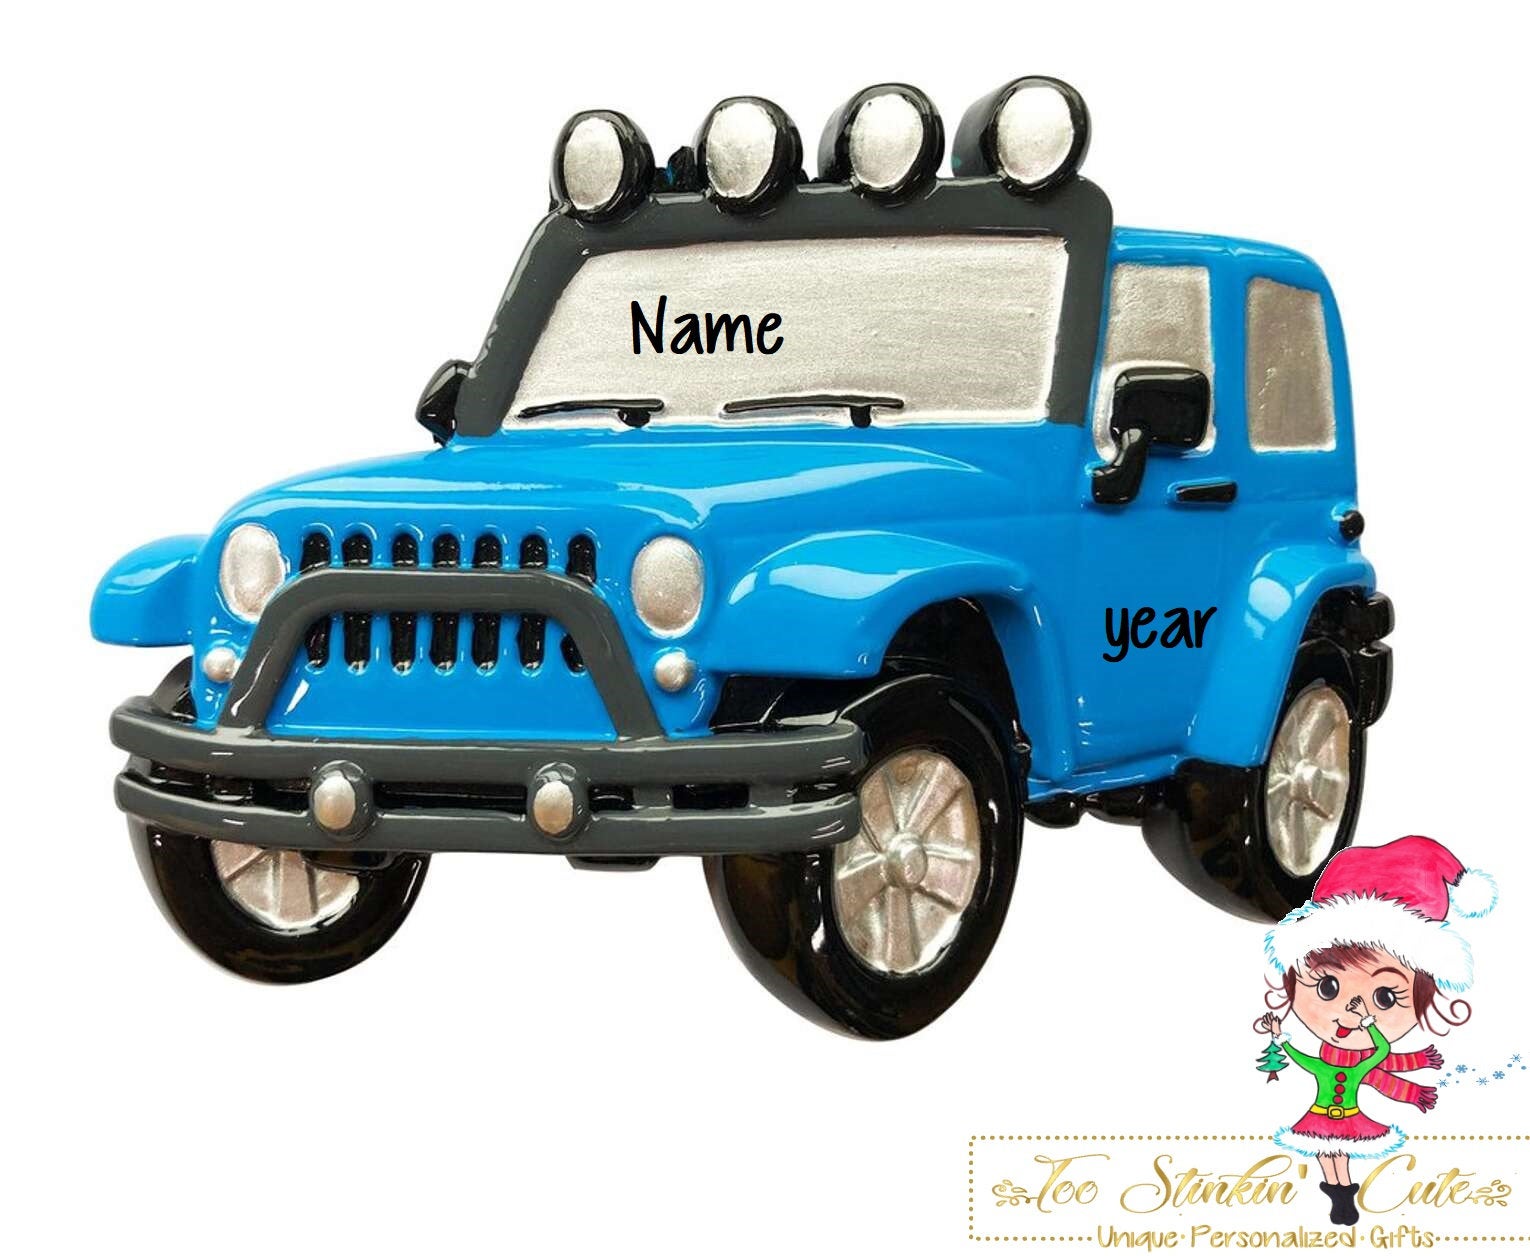 Christmas Ornament Blue 4x4 SUV- Personalized + Free Shipping!